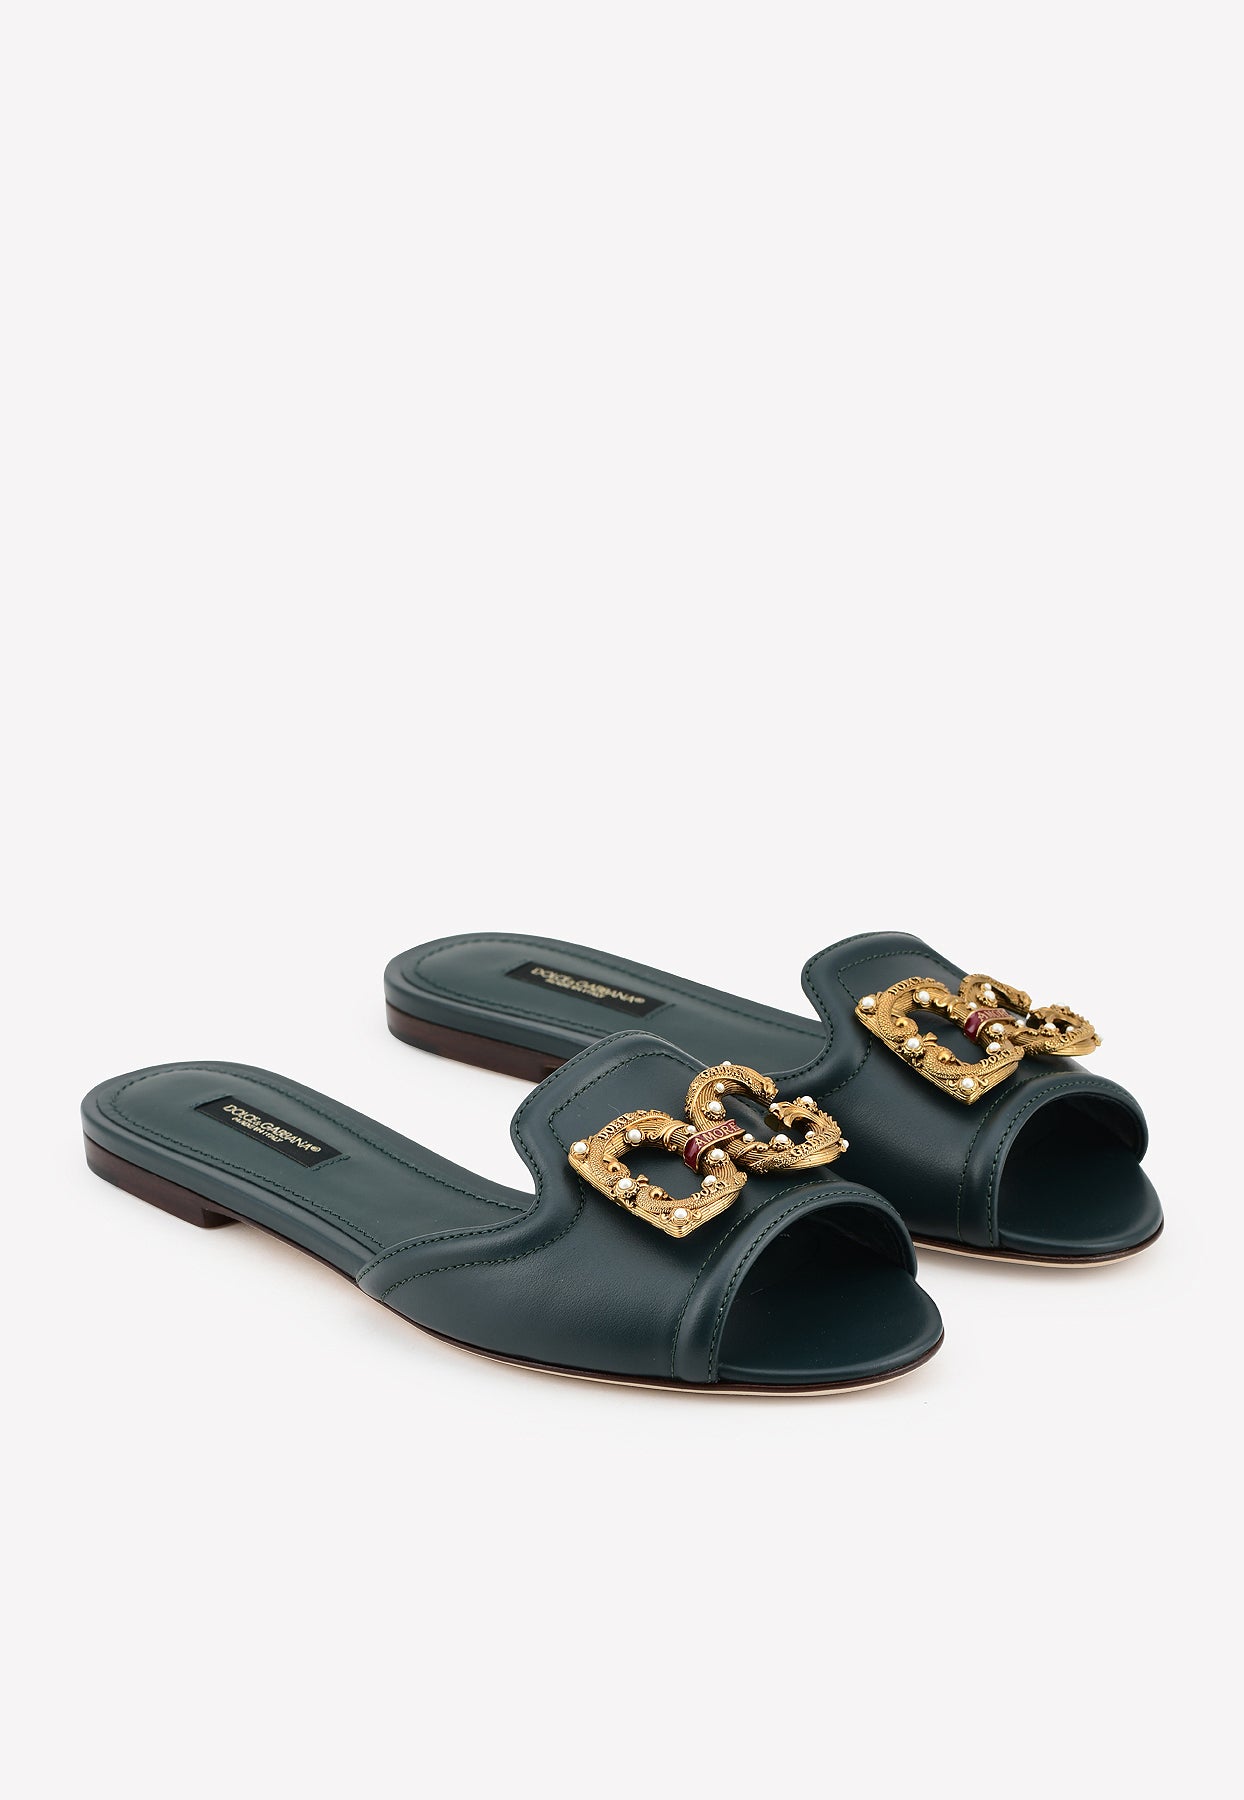 Bianca DG Amore Logo Slides in Nappa Leather – THAHAB KW